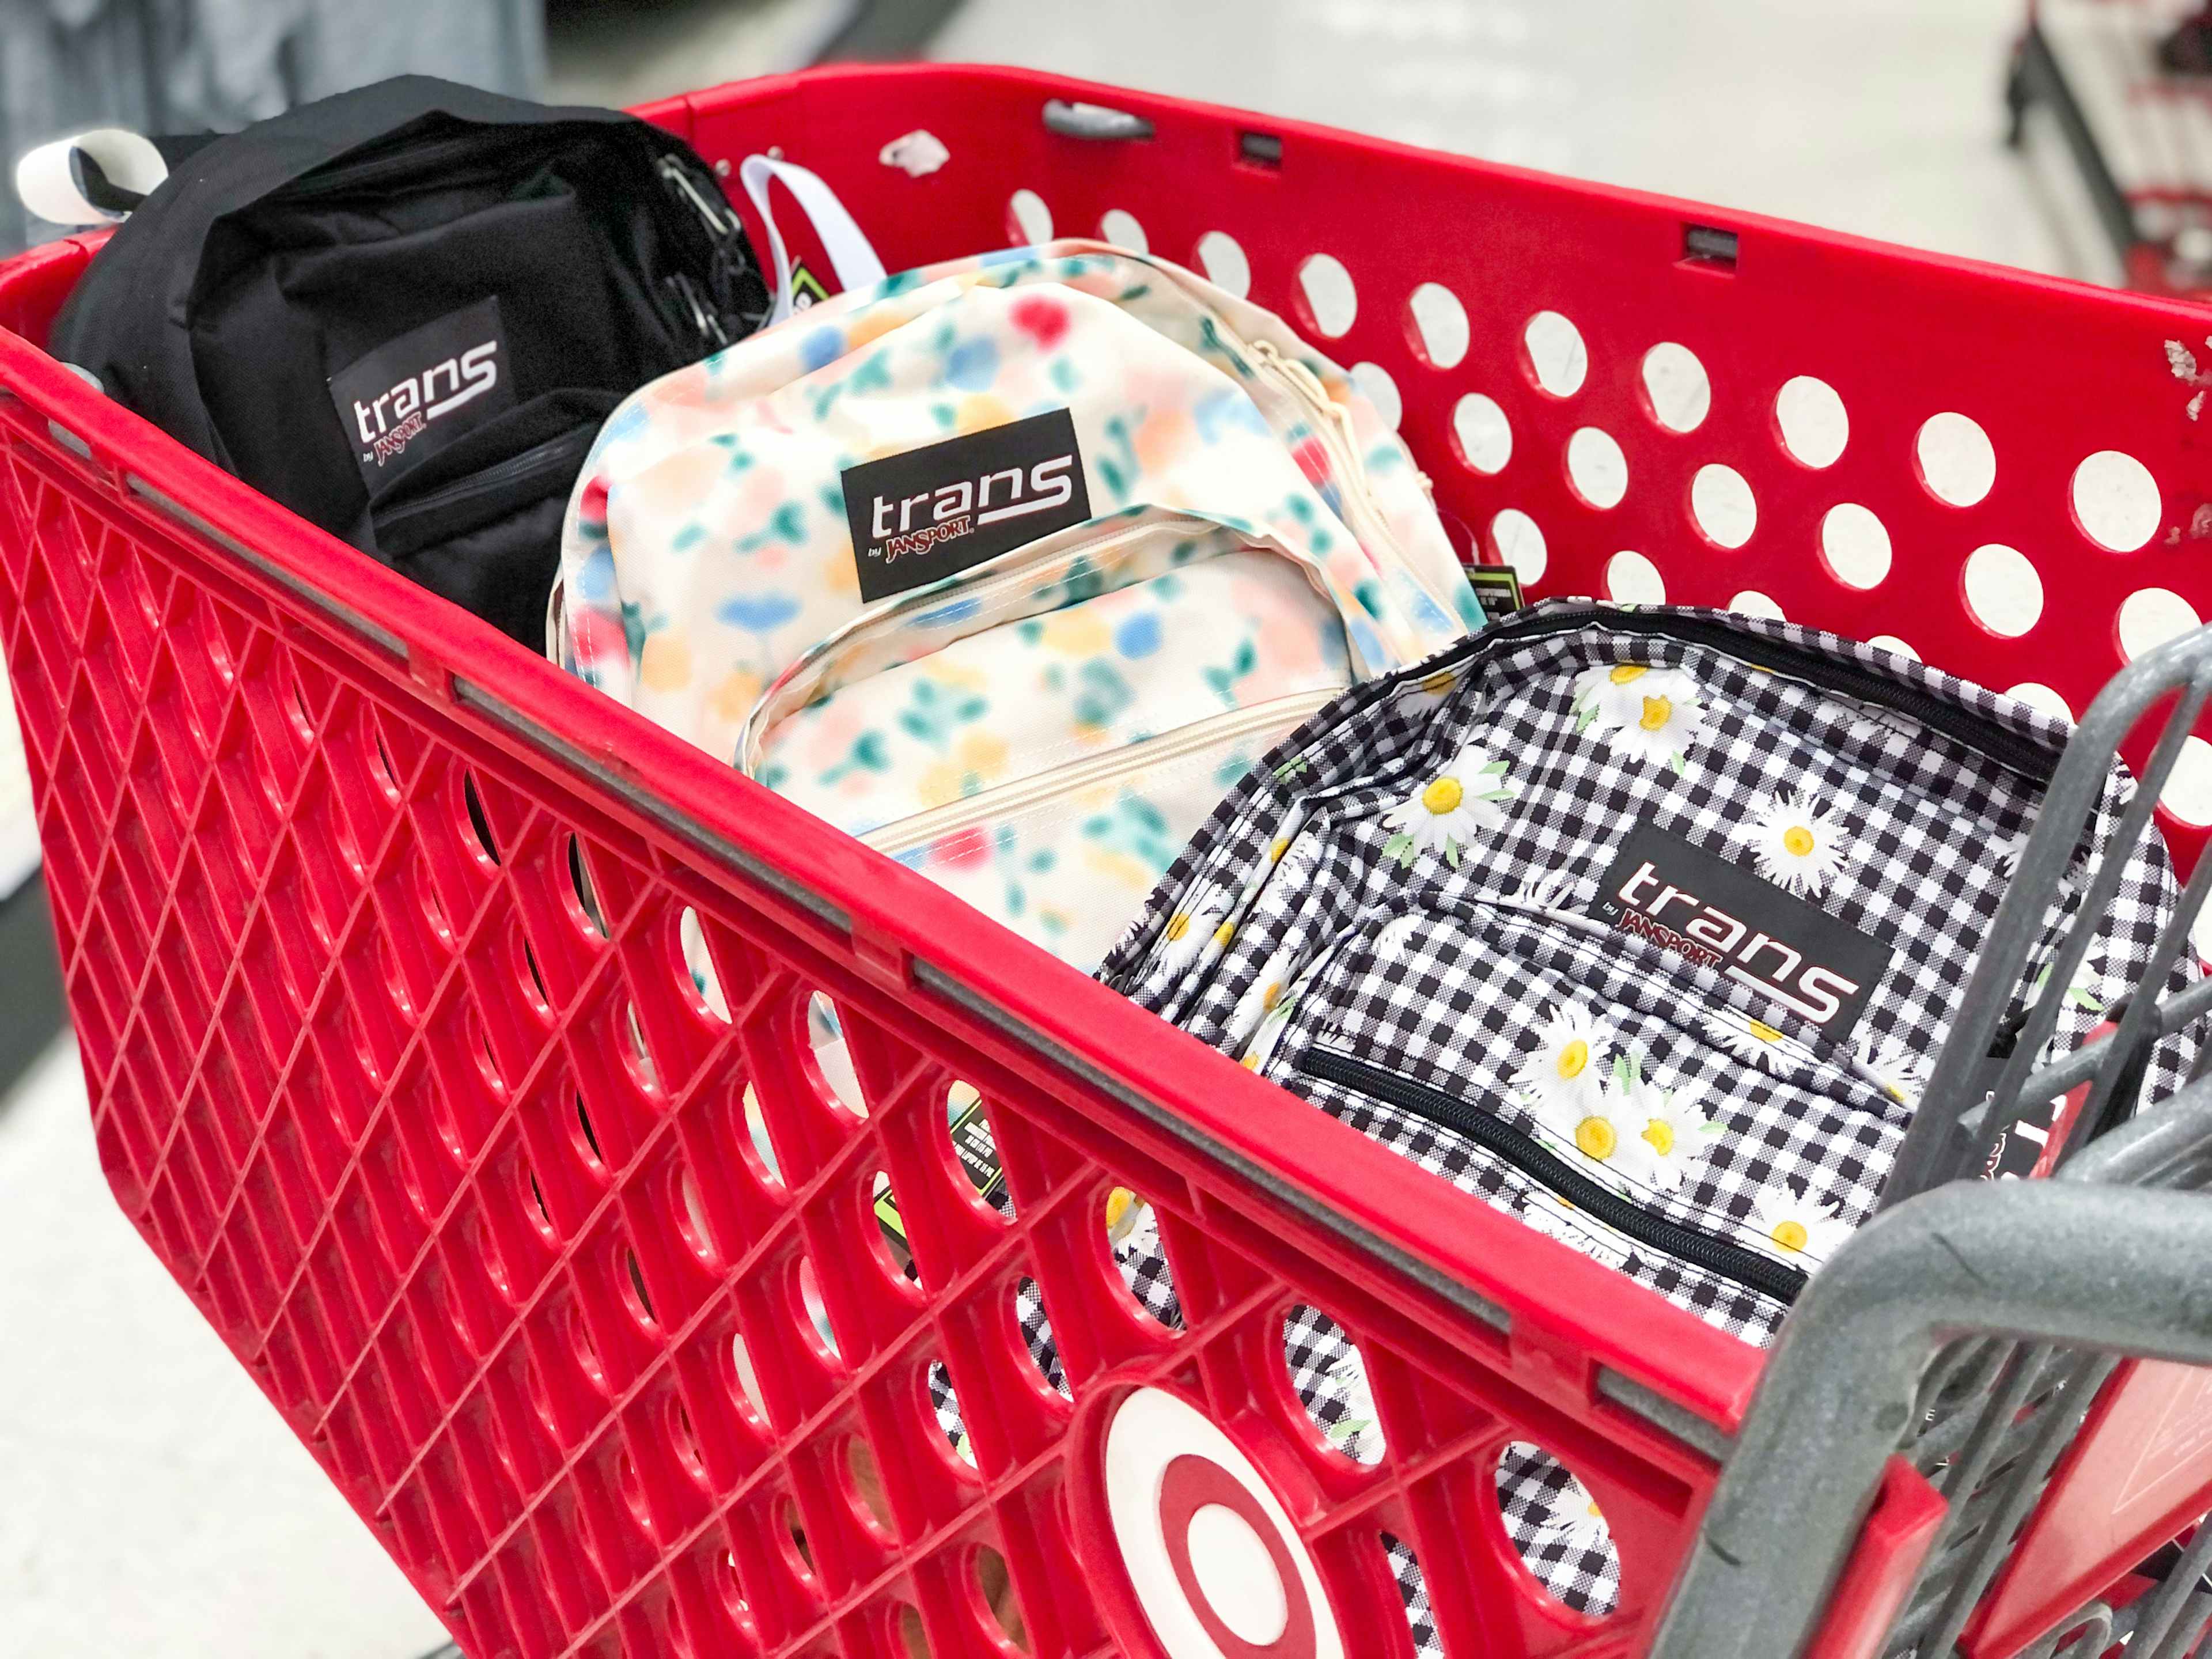 Three Trans Jansport backpacks in a shopping cart at Target.